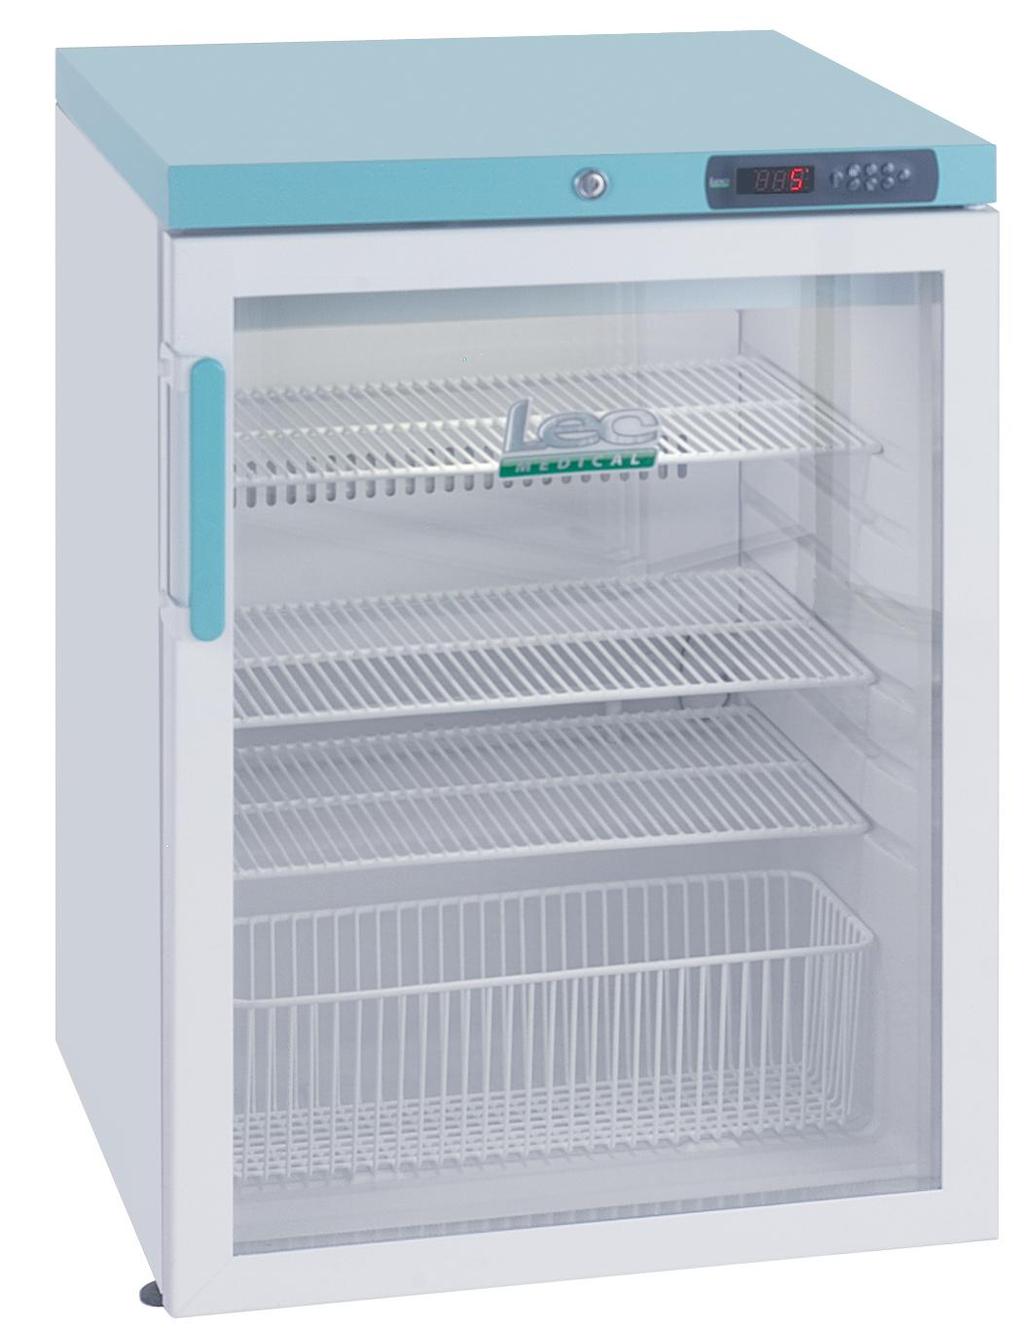 Product details 1 2 3 4 5 6 1. Lock 2. Electronic Controller 3. Antimicrobial handle 4. Wire Shelf 5. Wire Basket 6.